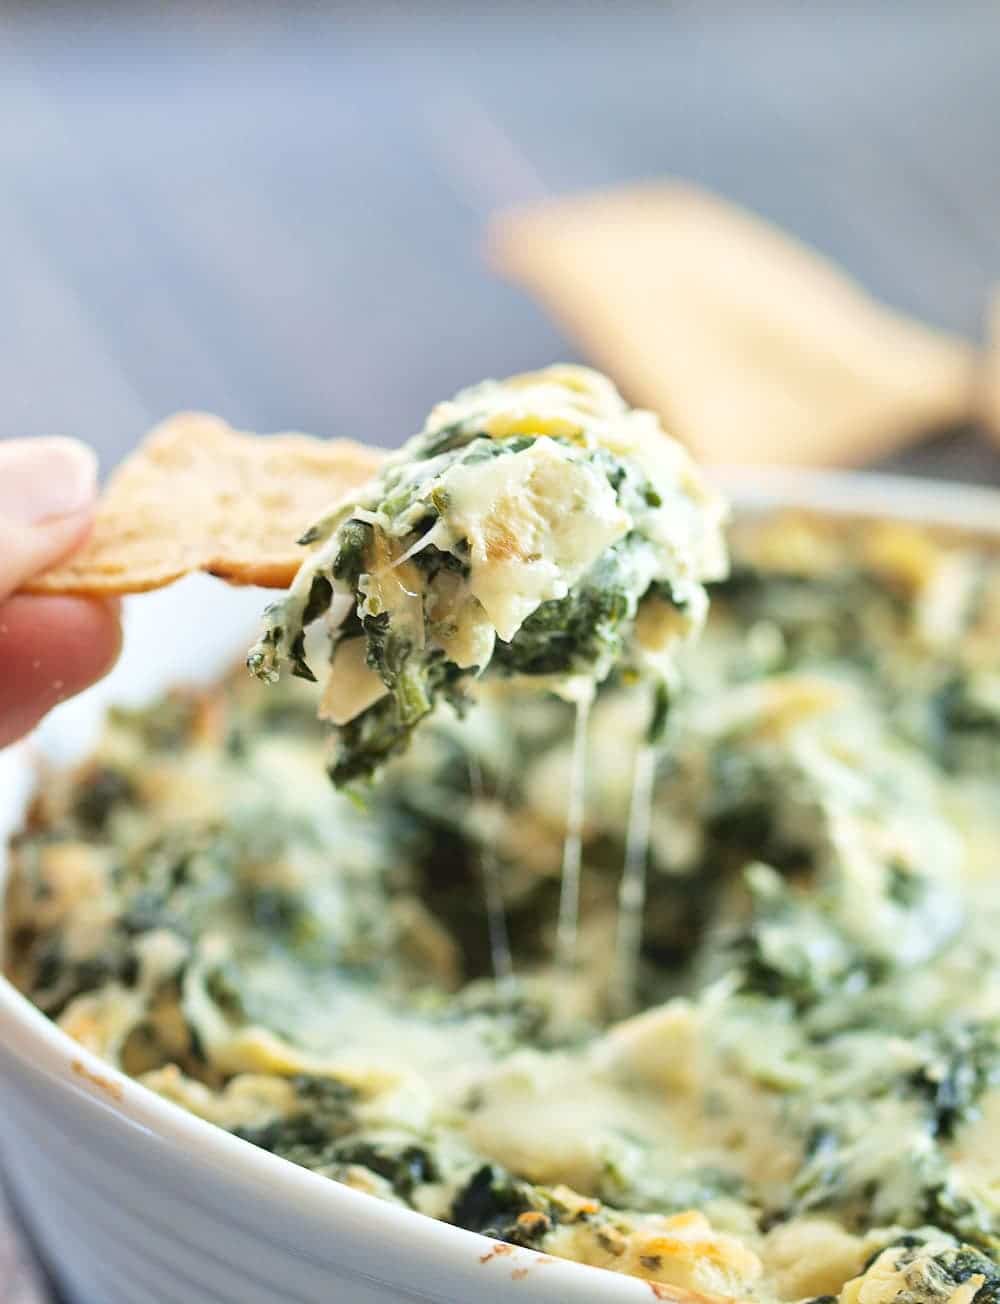 warm snacks for cold days: spinach artichoke dip